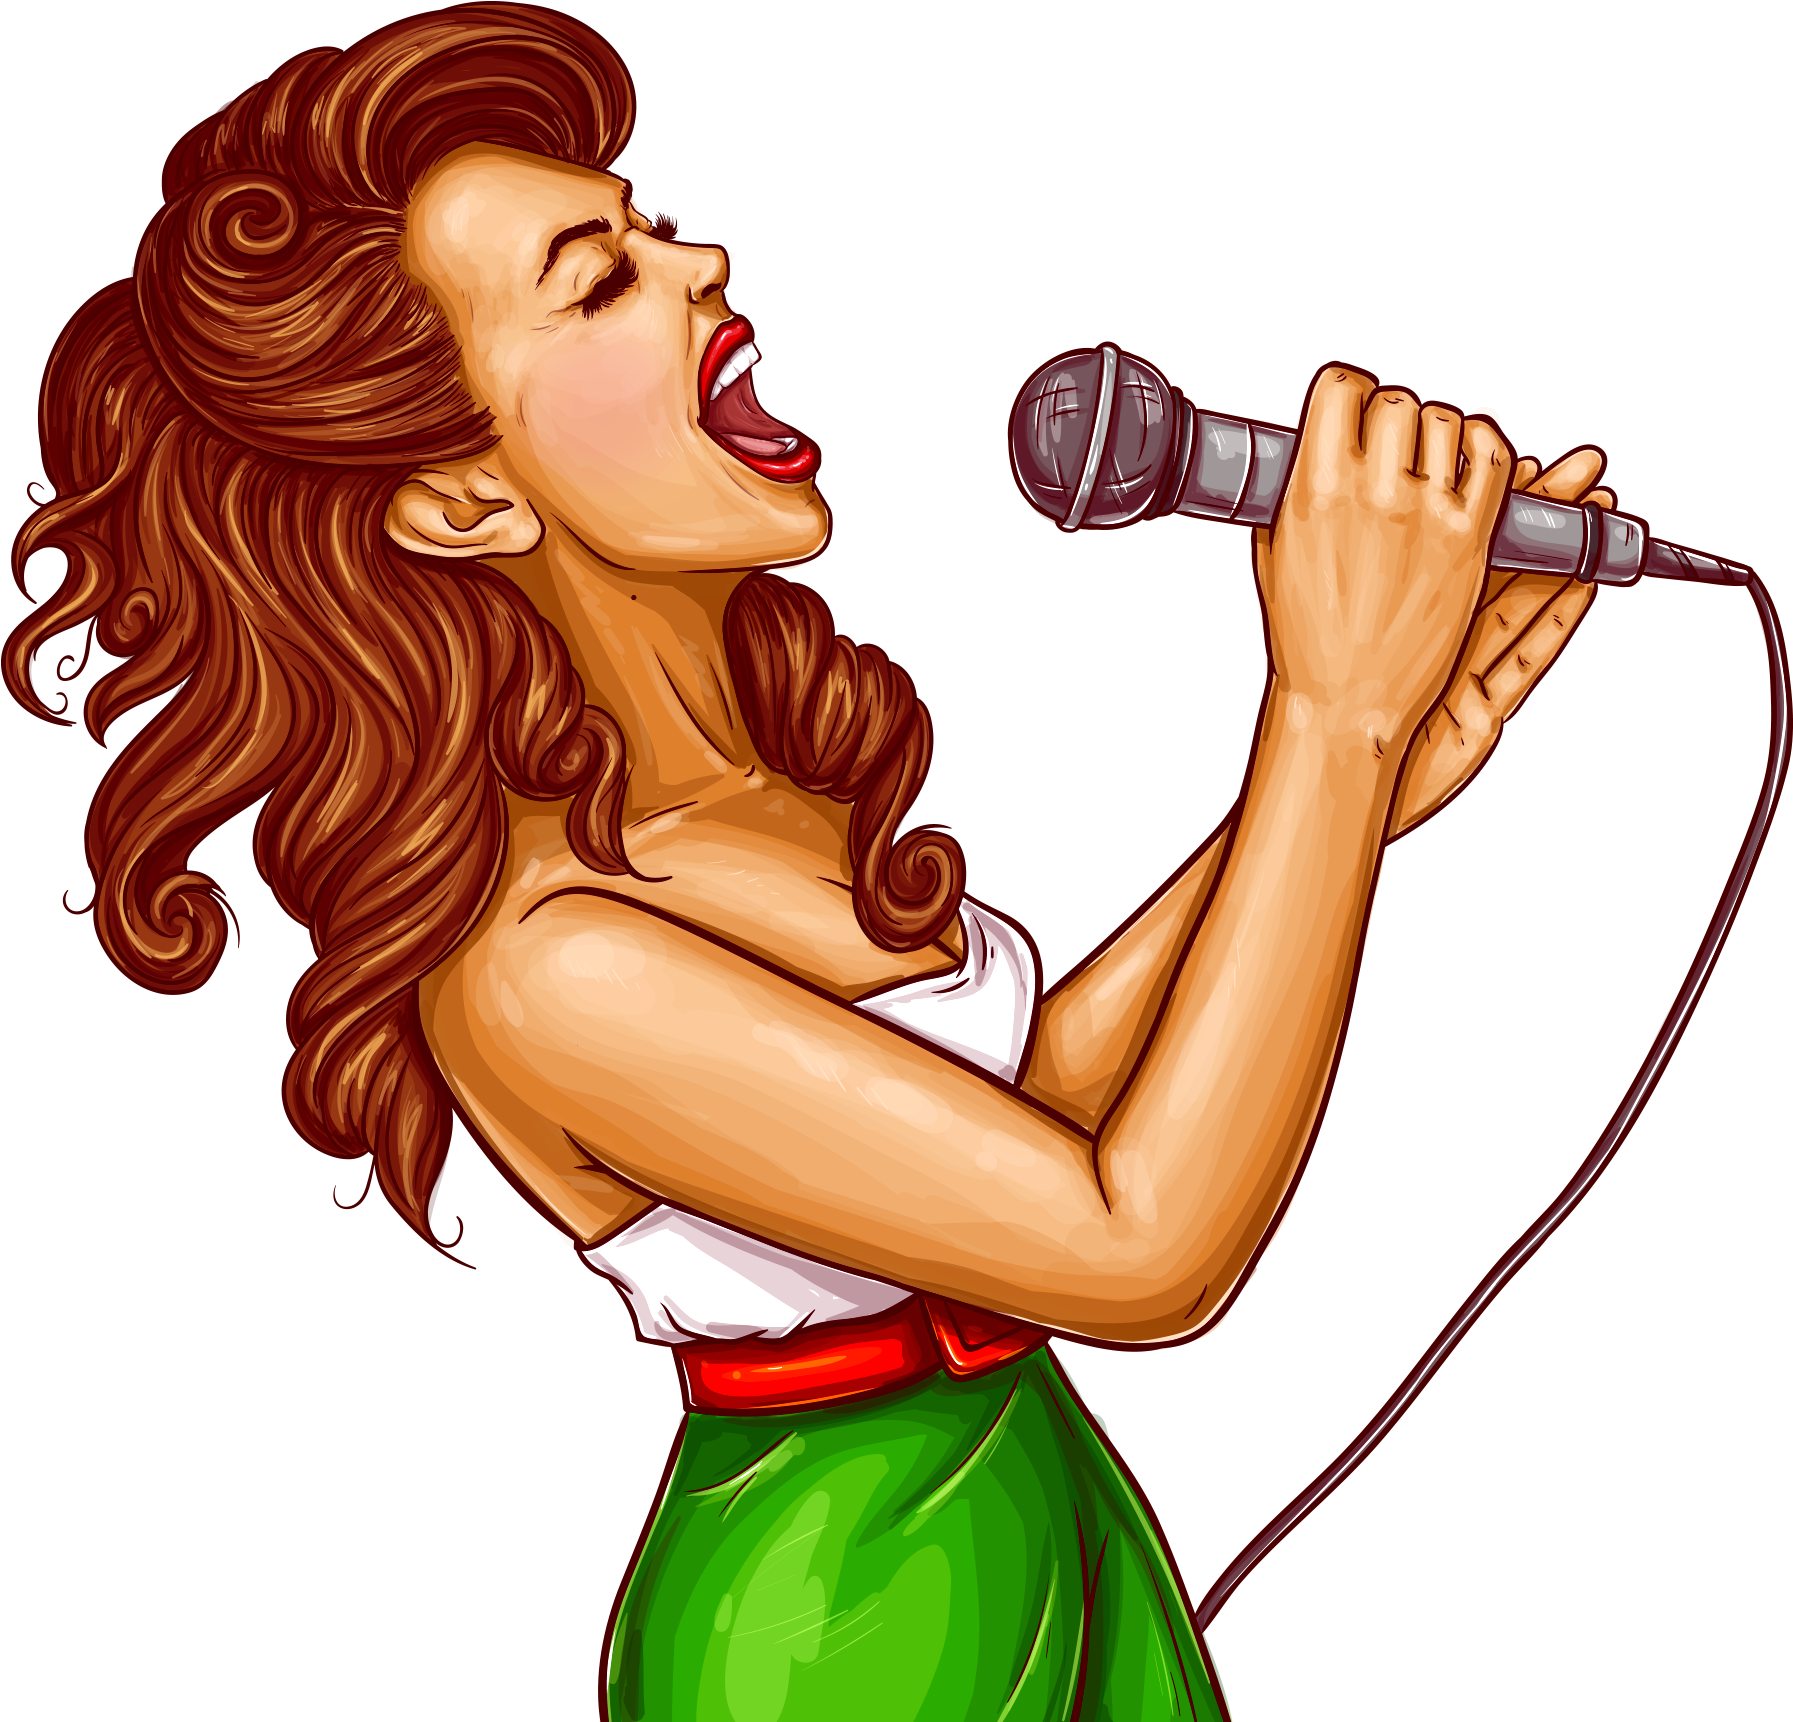 A Cartoon Of A Woman Singing Into A Microphone